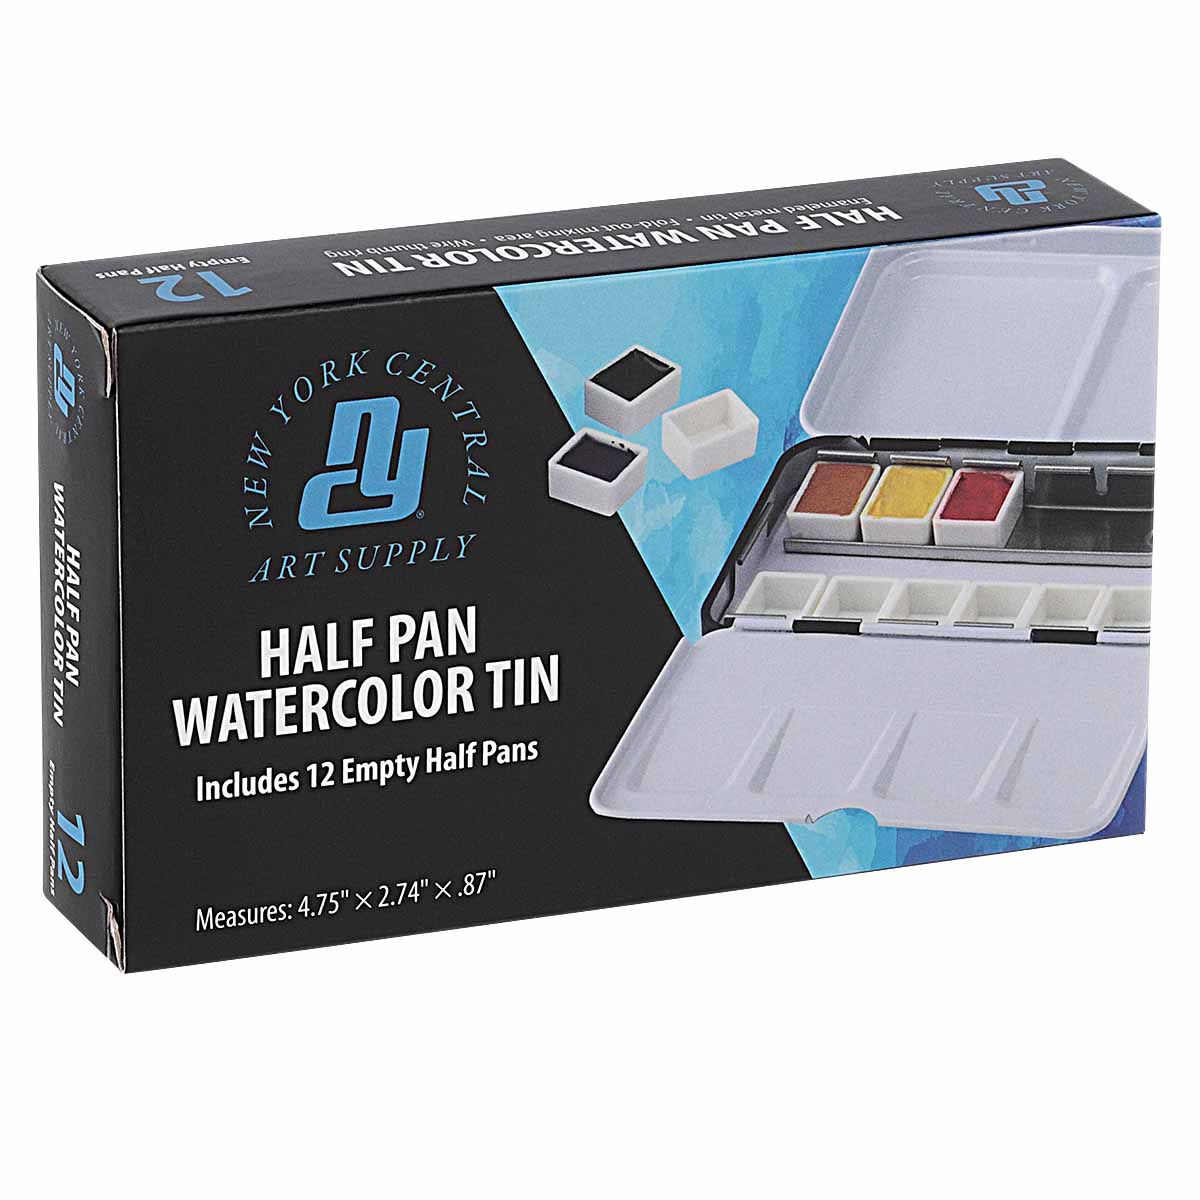 New York Central Watercolor Palettes - Empty Half Pan Boxes and Palette for Artists, Watercolor Painting, Students, Color Theory, & More! - 48 Half